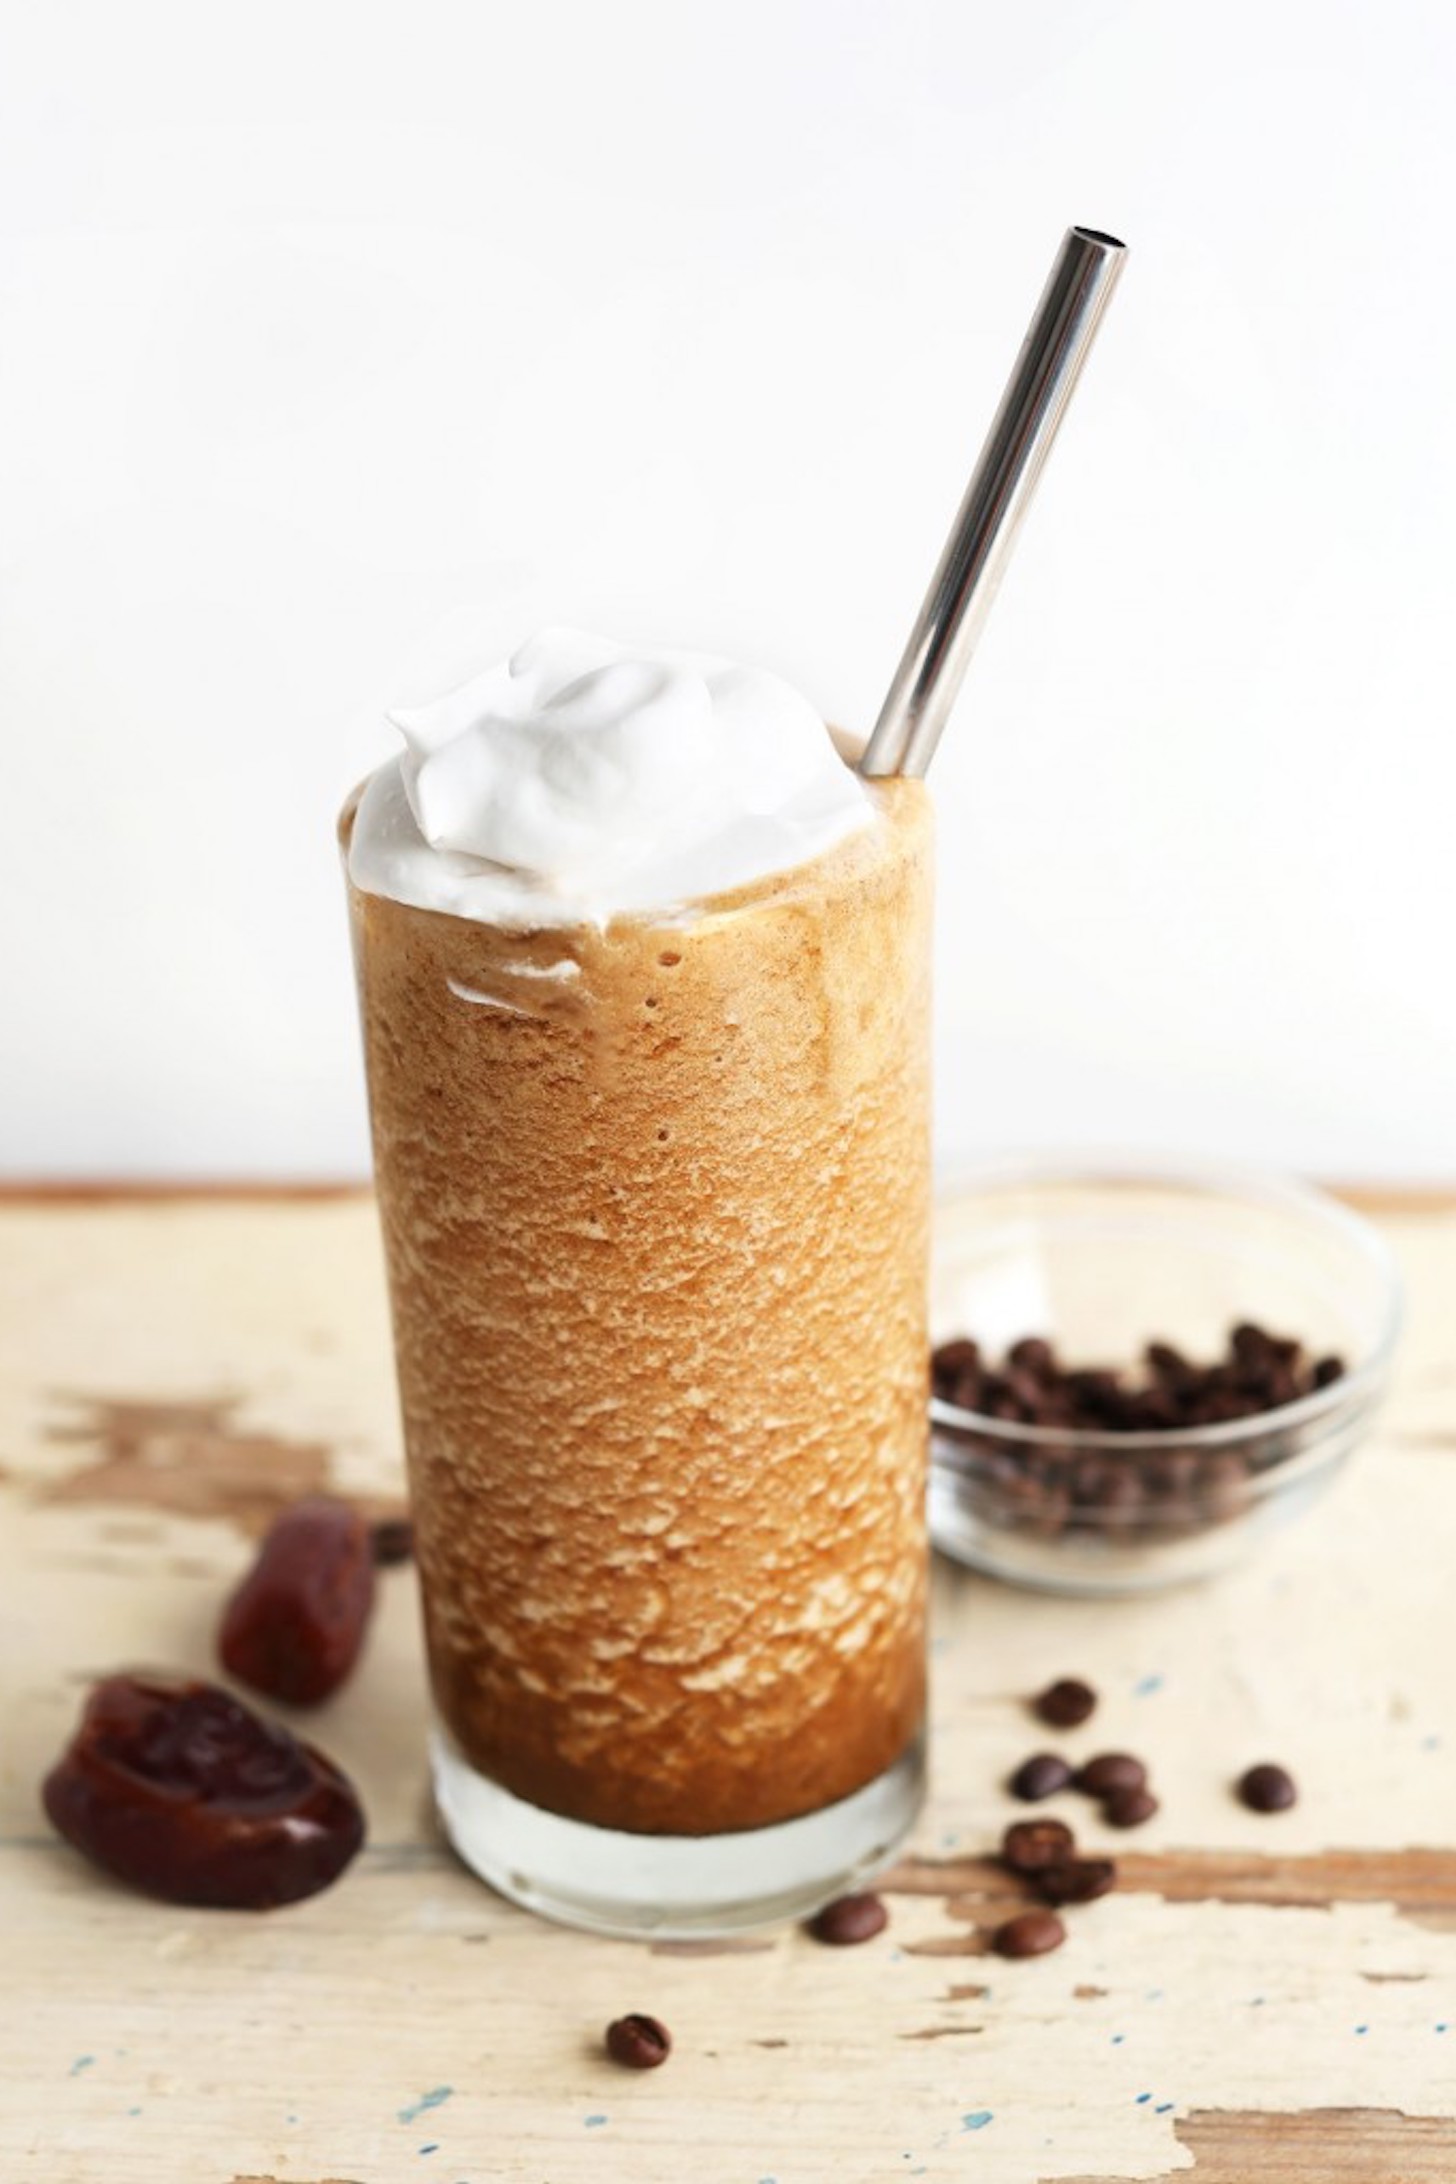 https://minimalistbaker.com/wp-content/uploads/2015/07/EASY-3-ingredient-Caramel-Frappuccino-with-Almond-Milk-Ice-Cubes-Cold-Brew-Coffee-and-Date-Caramel-vegan-glutenfree-coffee-frappuccino-recipe-minimalistbaker-713x1024-1.jpg